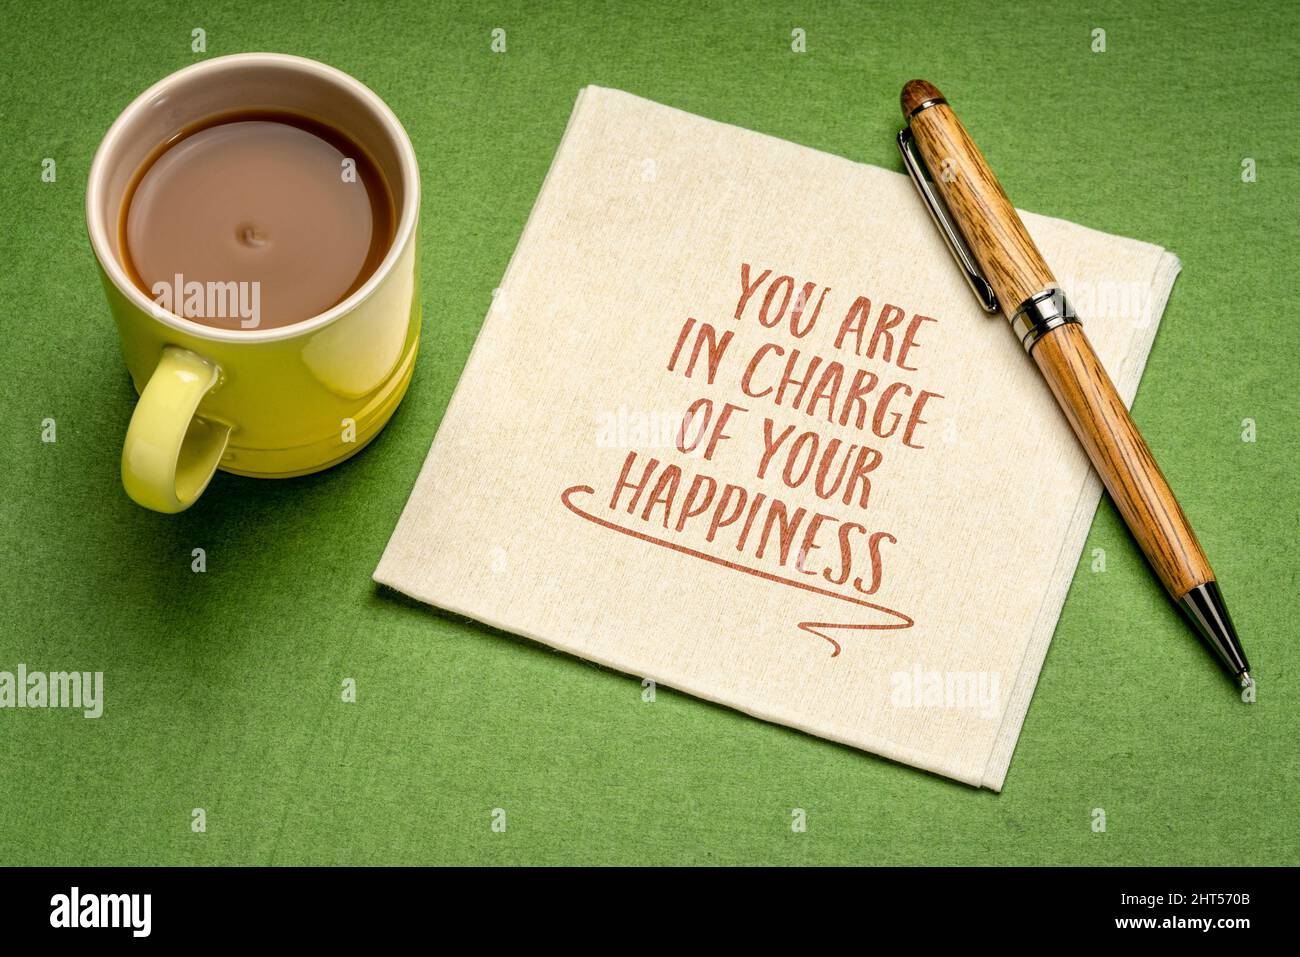 You are in charge of your happiness - inspirational reminder note on a napkin with a cup of coffee, positive mindset and personal development concept Stock Photo